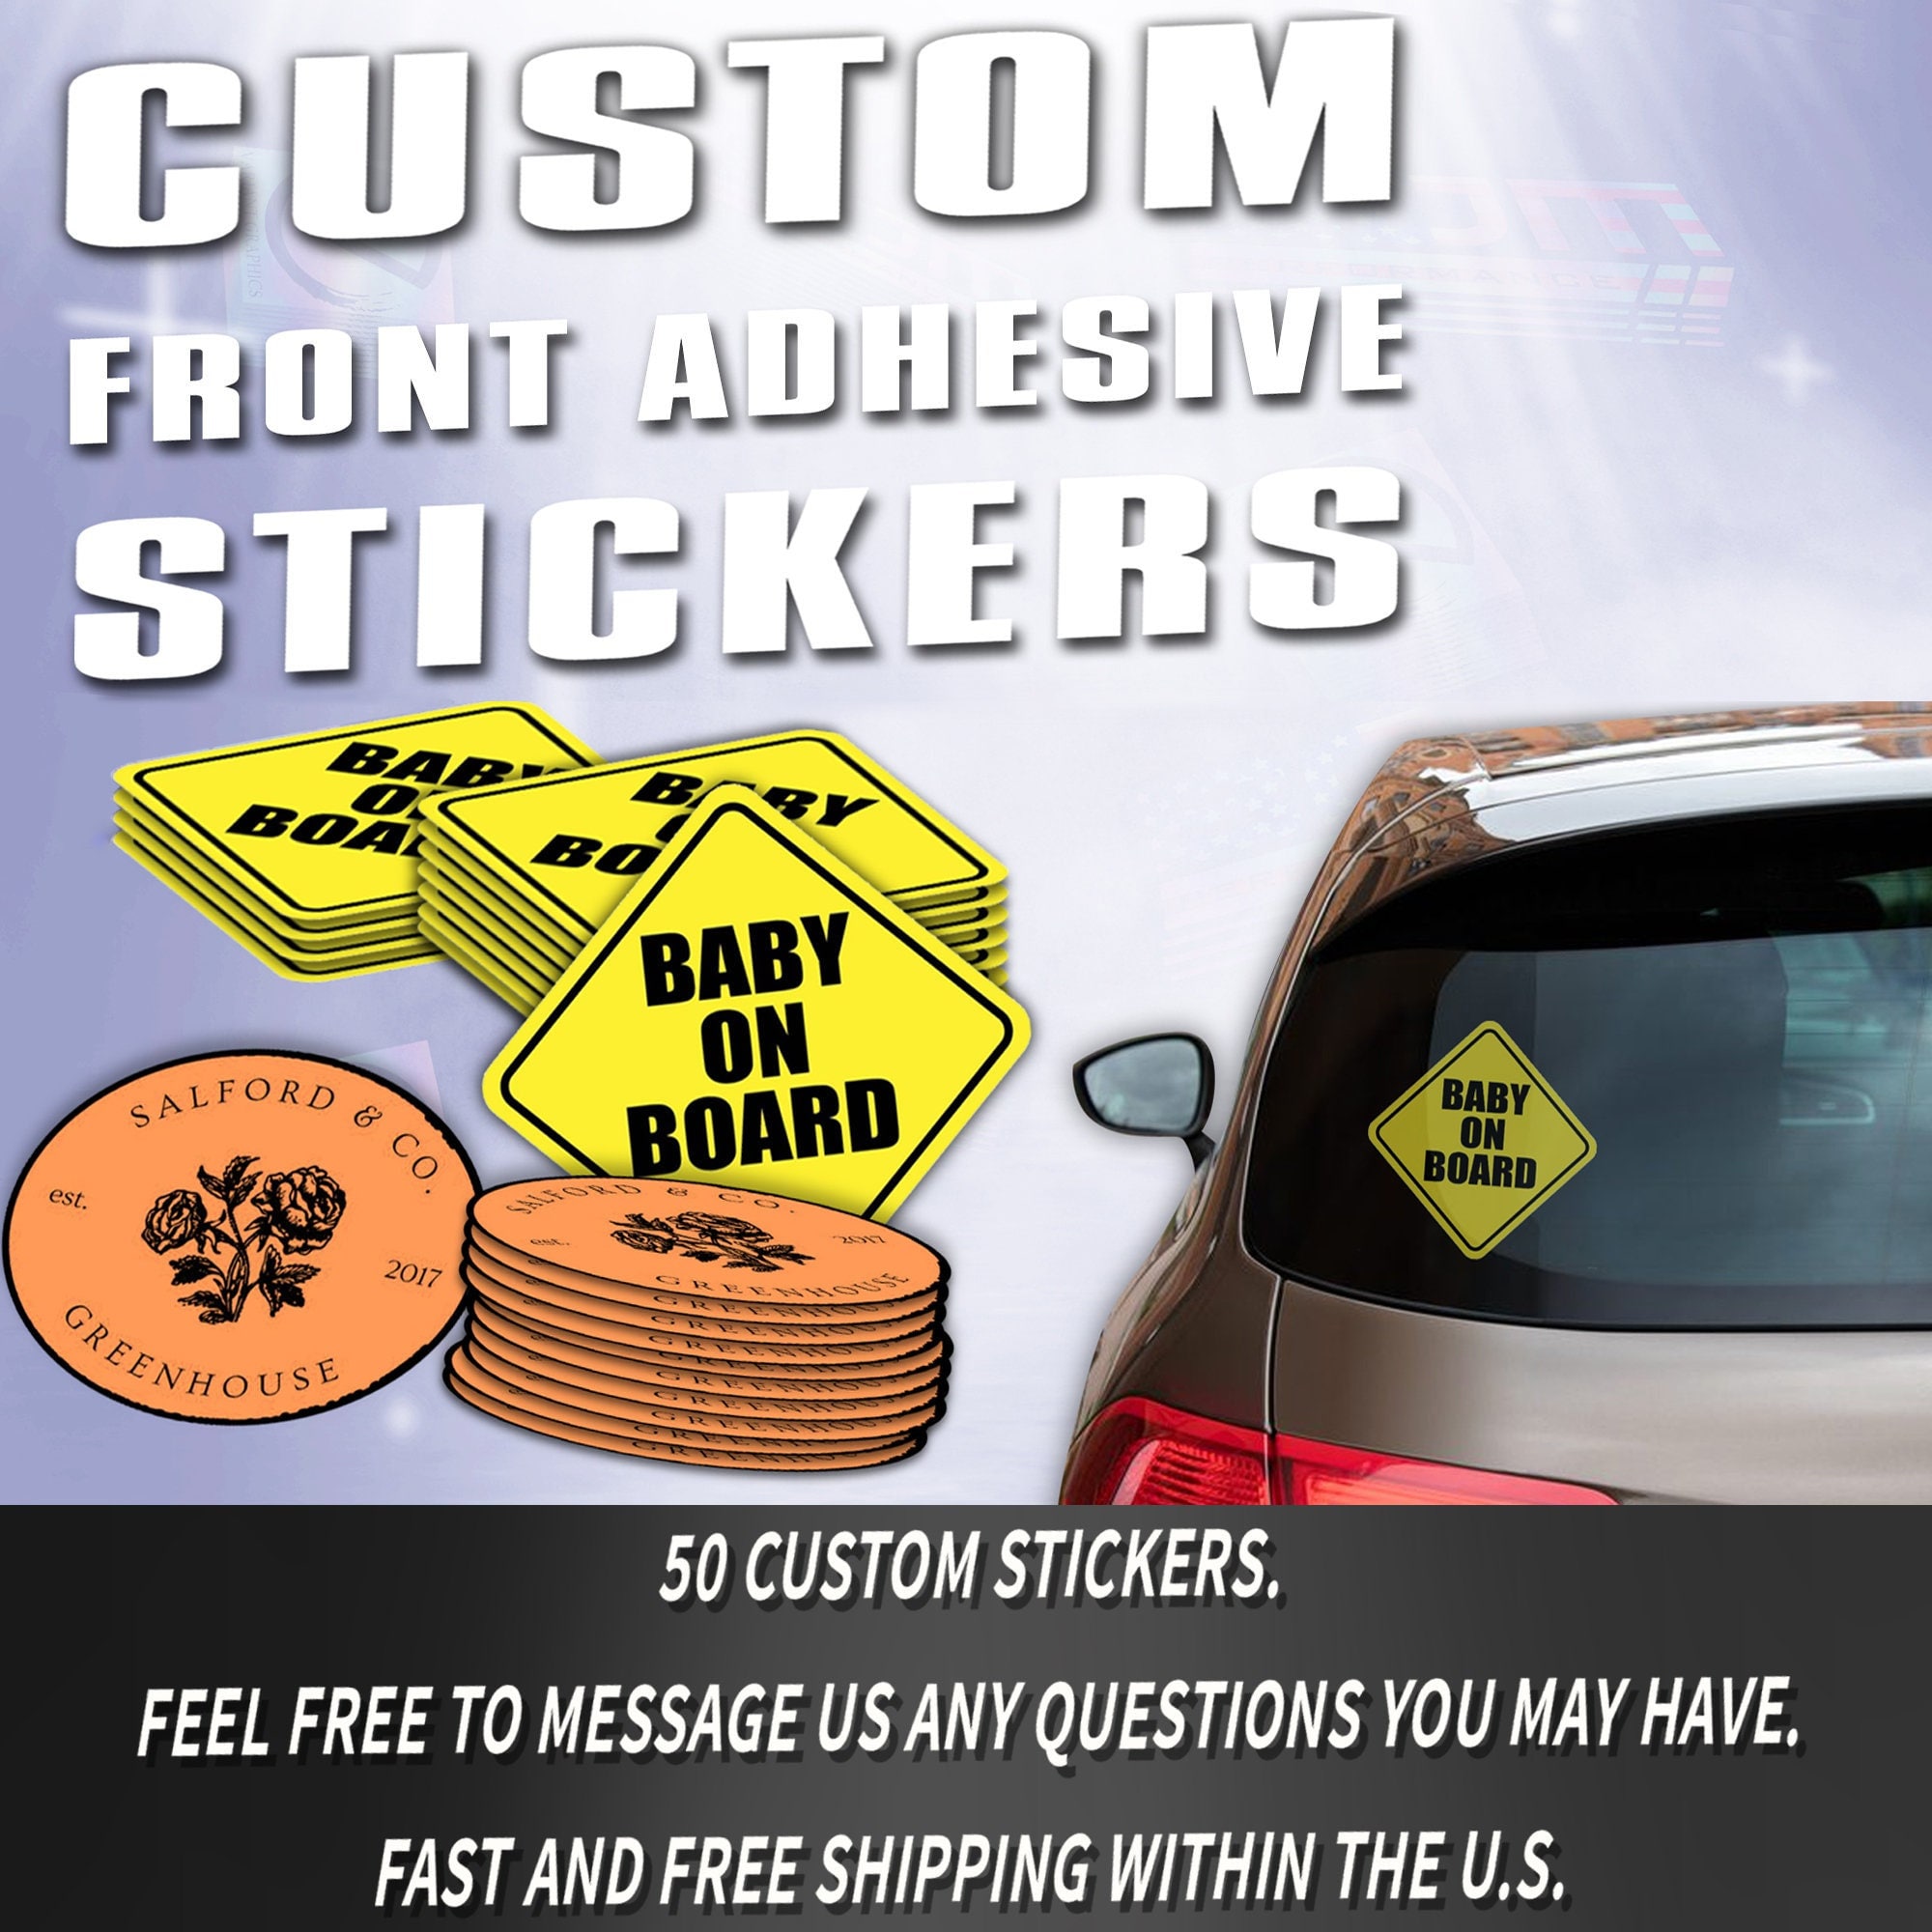 Customizable Front Adhesive Stickers